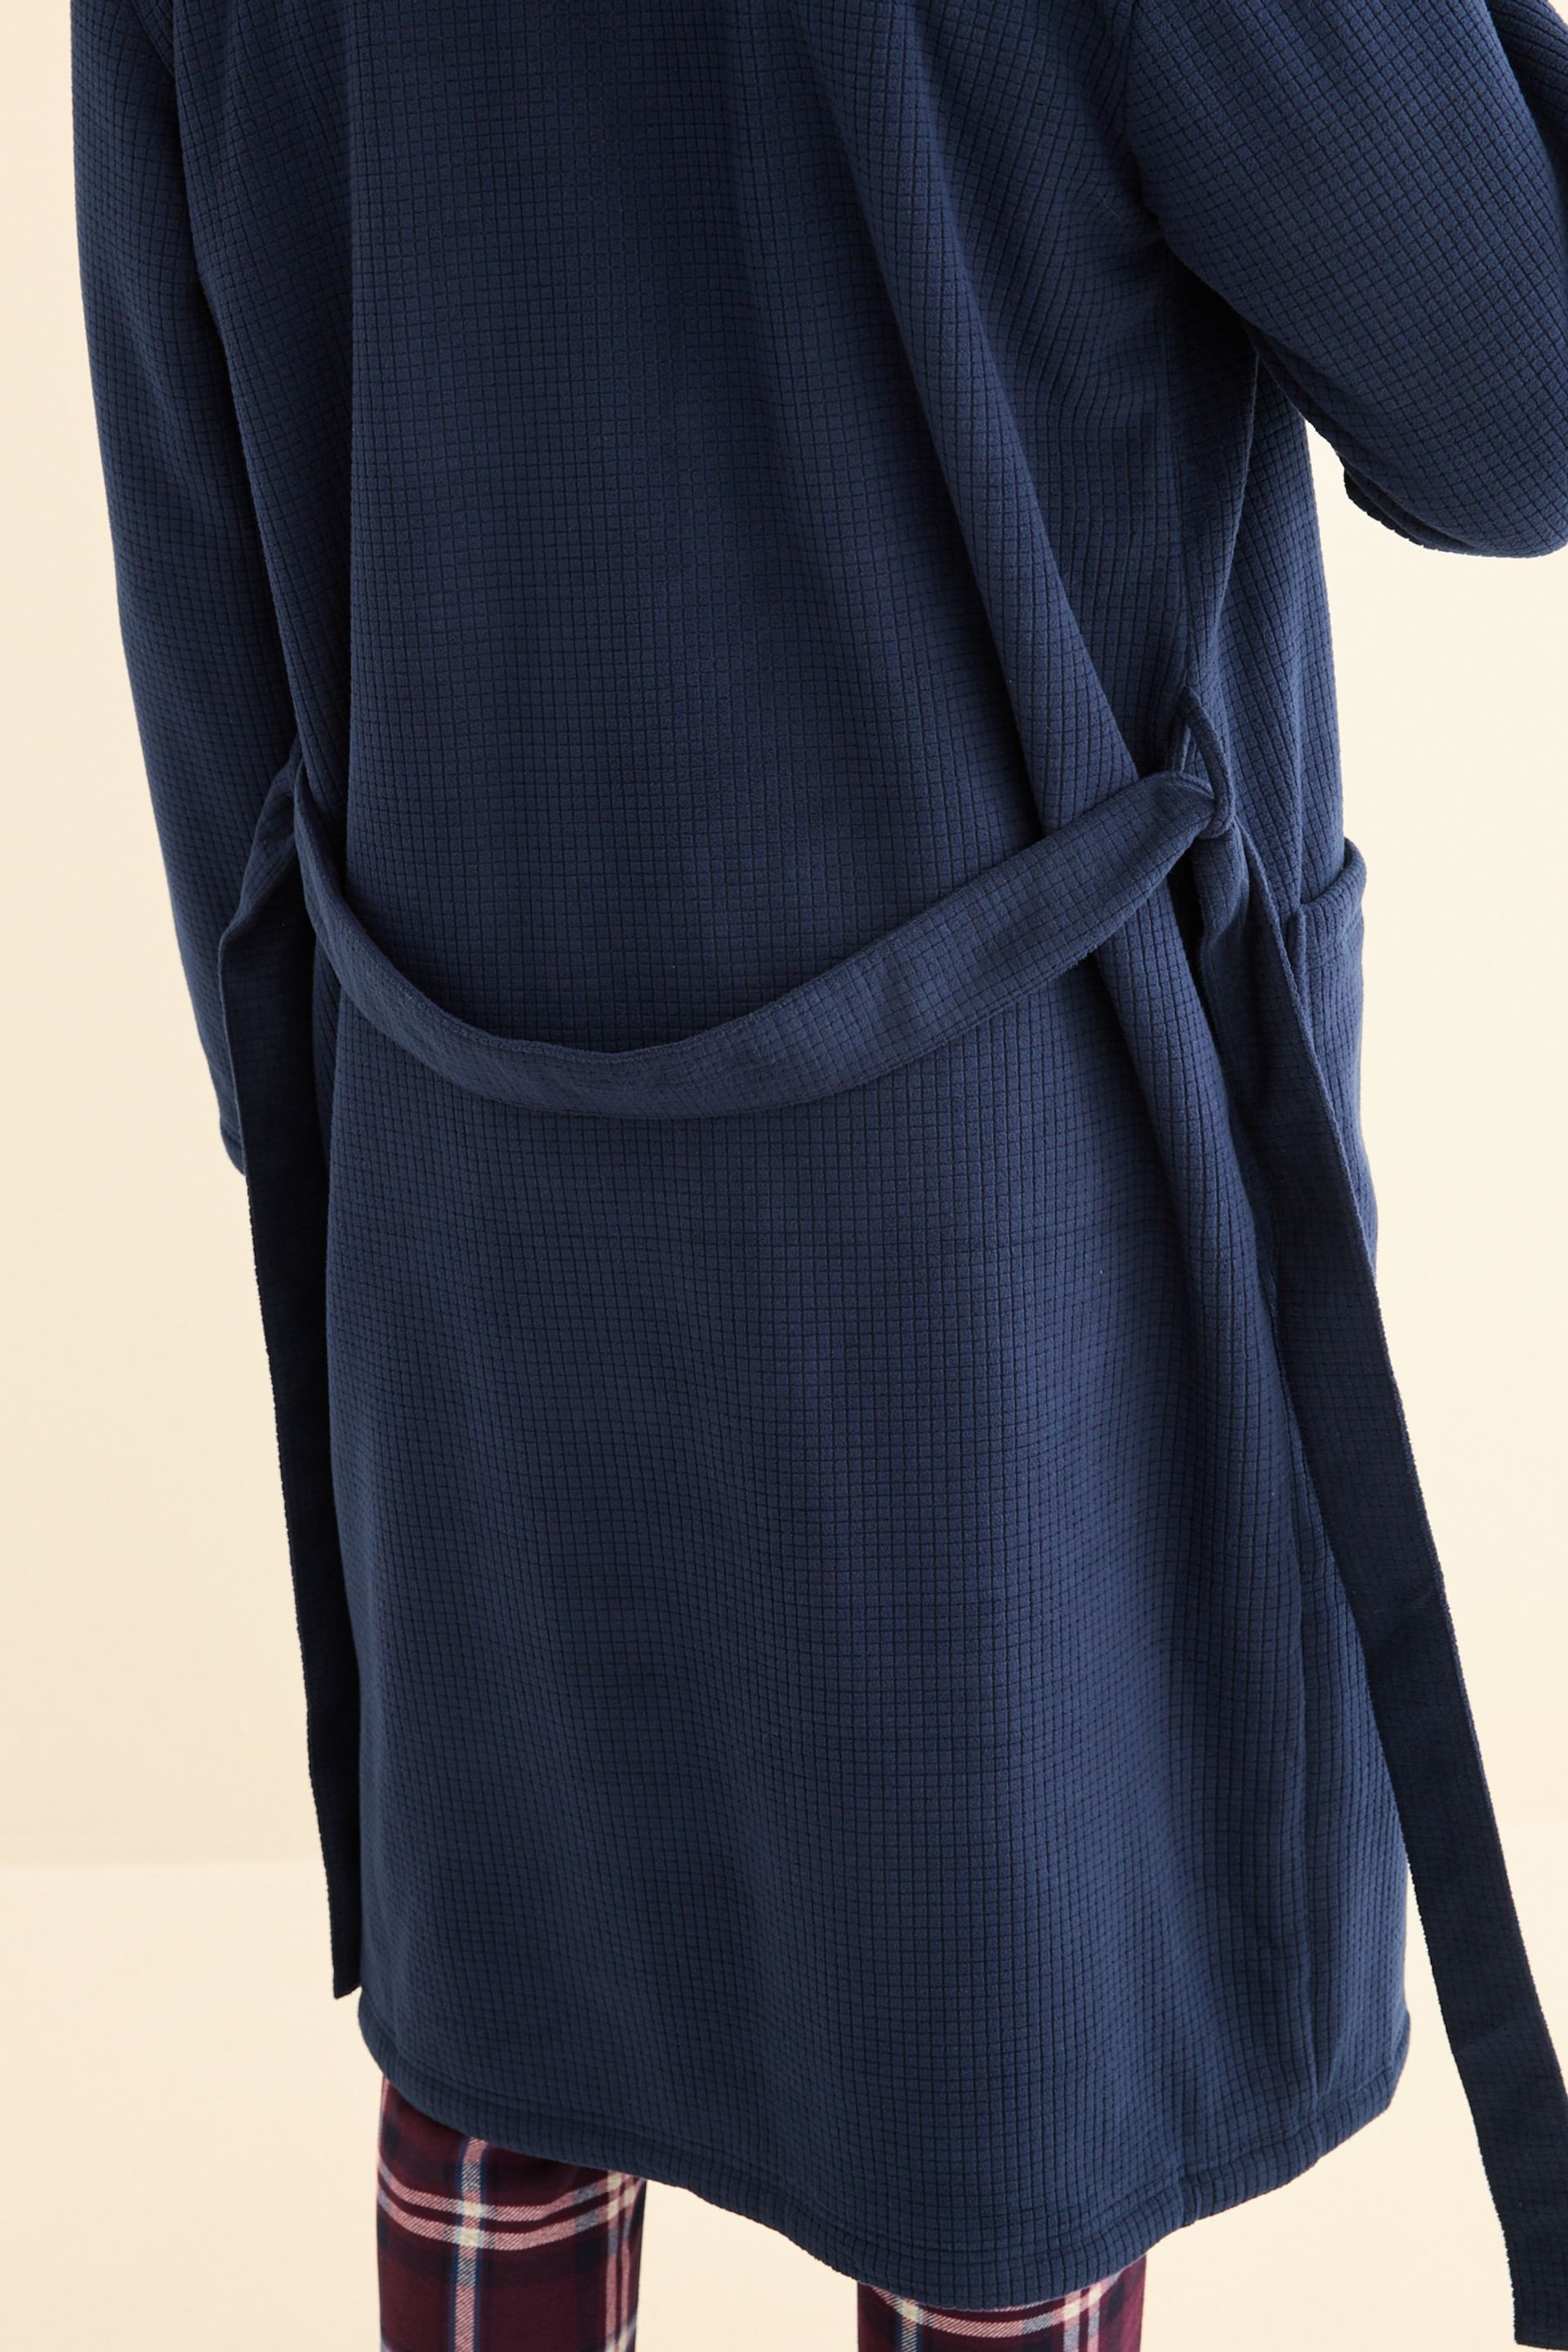 Navy Blue Borg Lined Hooded Dressing Gown - Image 6 of 10